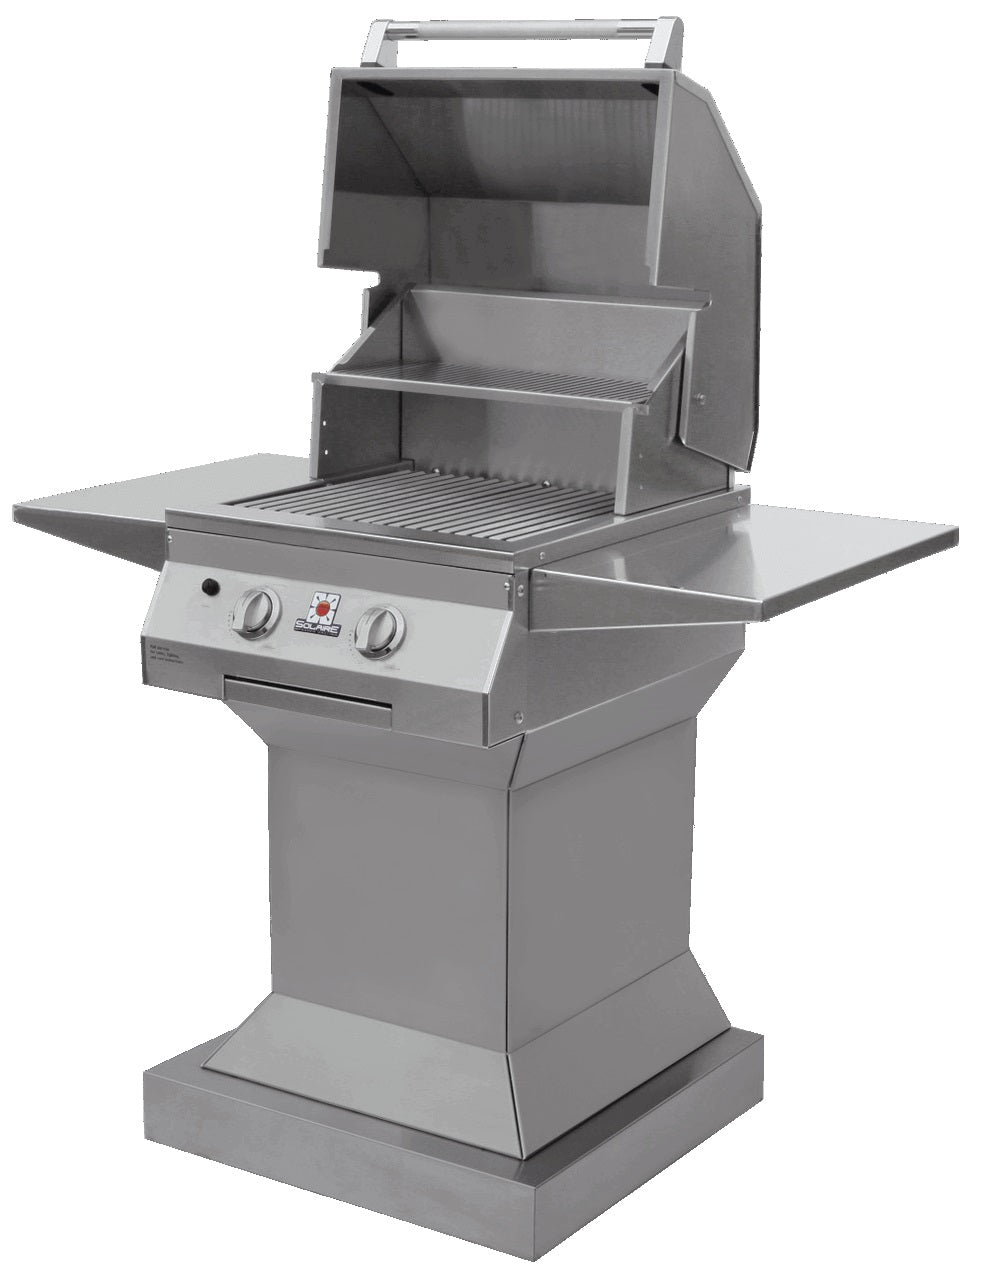 Deluxe 21XL Solaire Infrared Grill